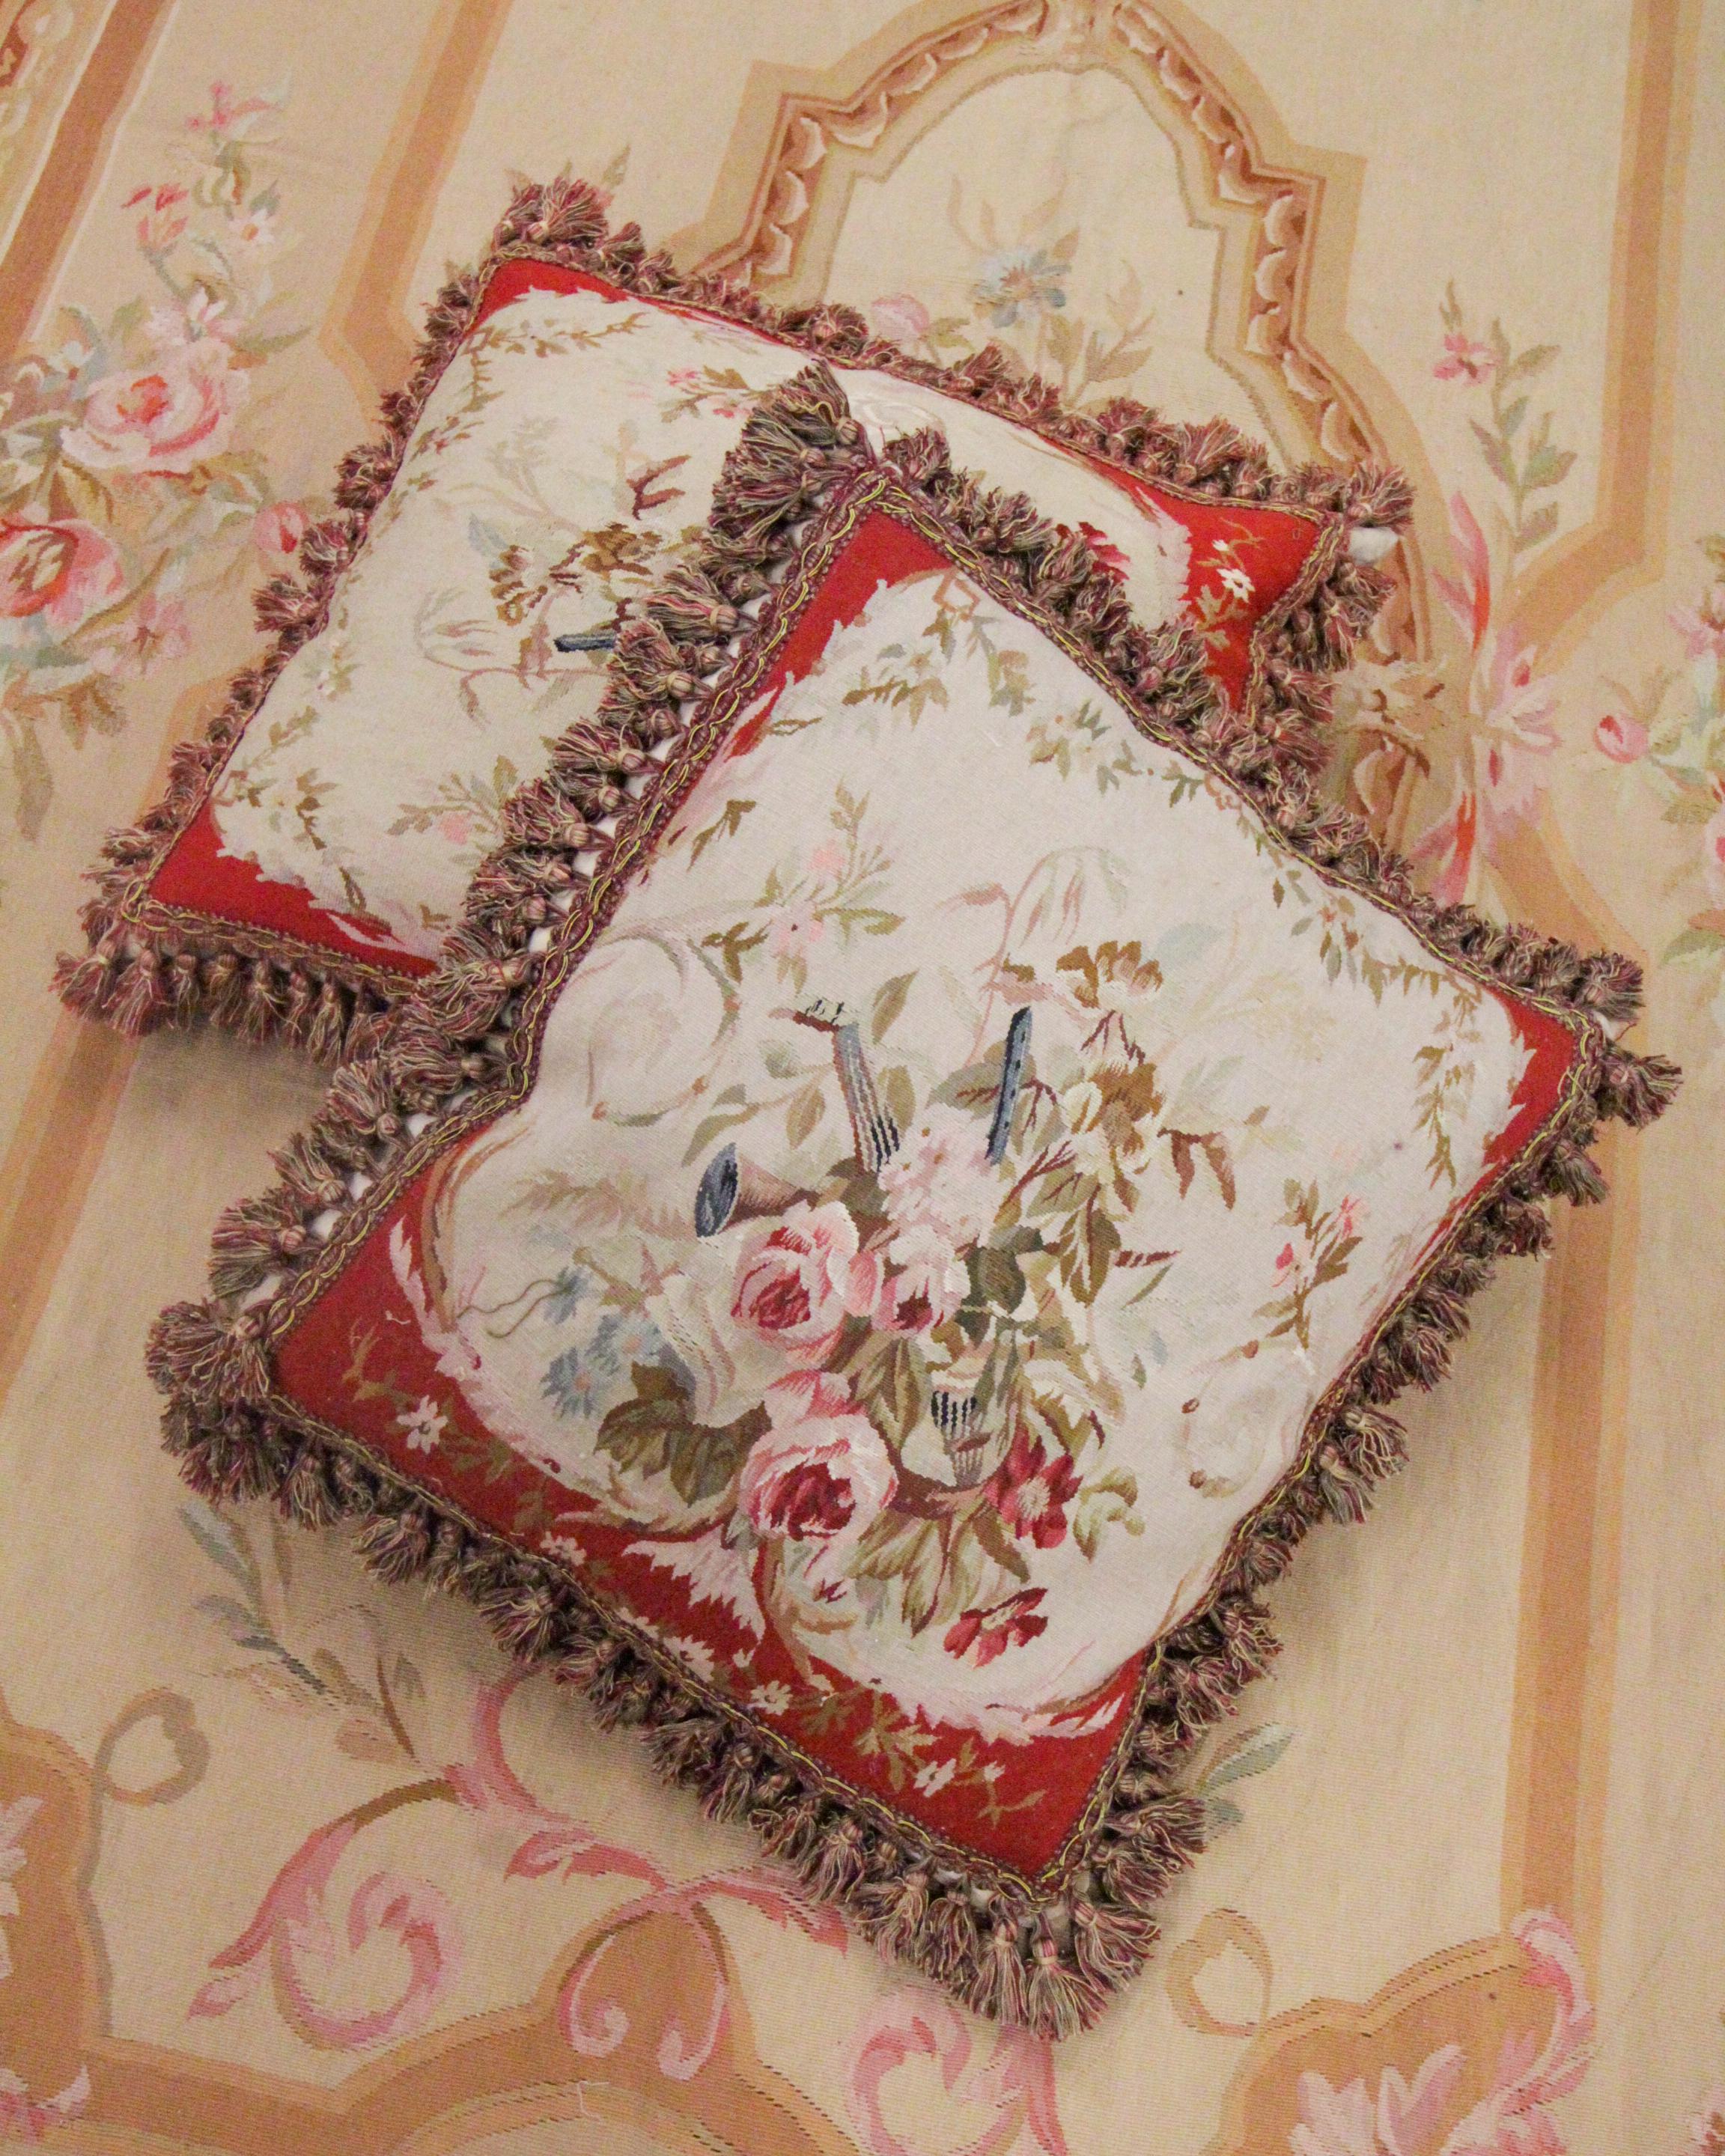 This graceful cushion cover is a handwoven Aubusson piece woven by hand with locally sourced hand-spun wool and cotton. The design features a subtle cream background with floral patterns that decorate; a rich red frame then encloses this. The design